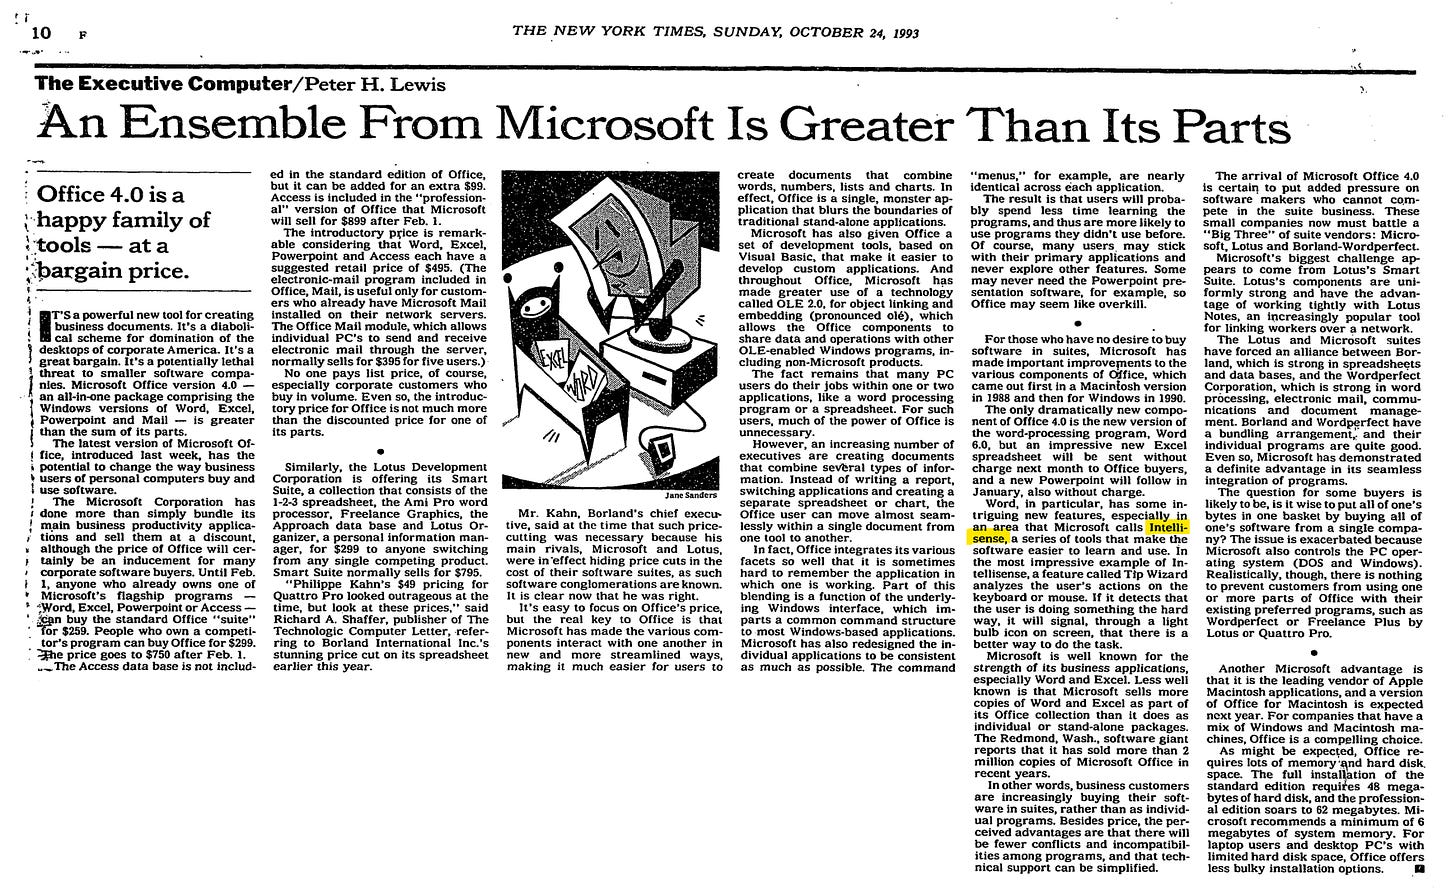 NY Times October 1993 "An Ensemble from Microsoft Is Greater Than Its Parts" - a review of sorts on Office 4.0 that mentions IntelliSense.